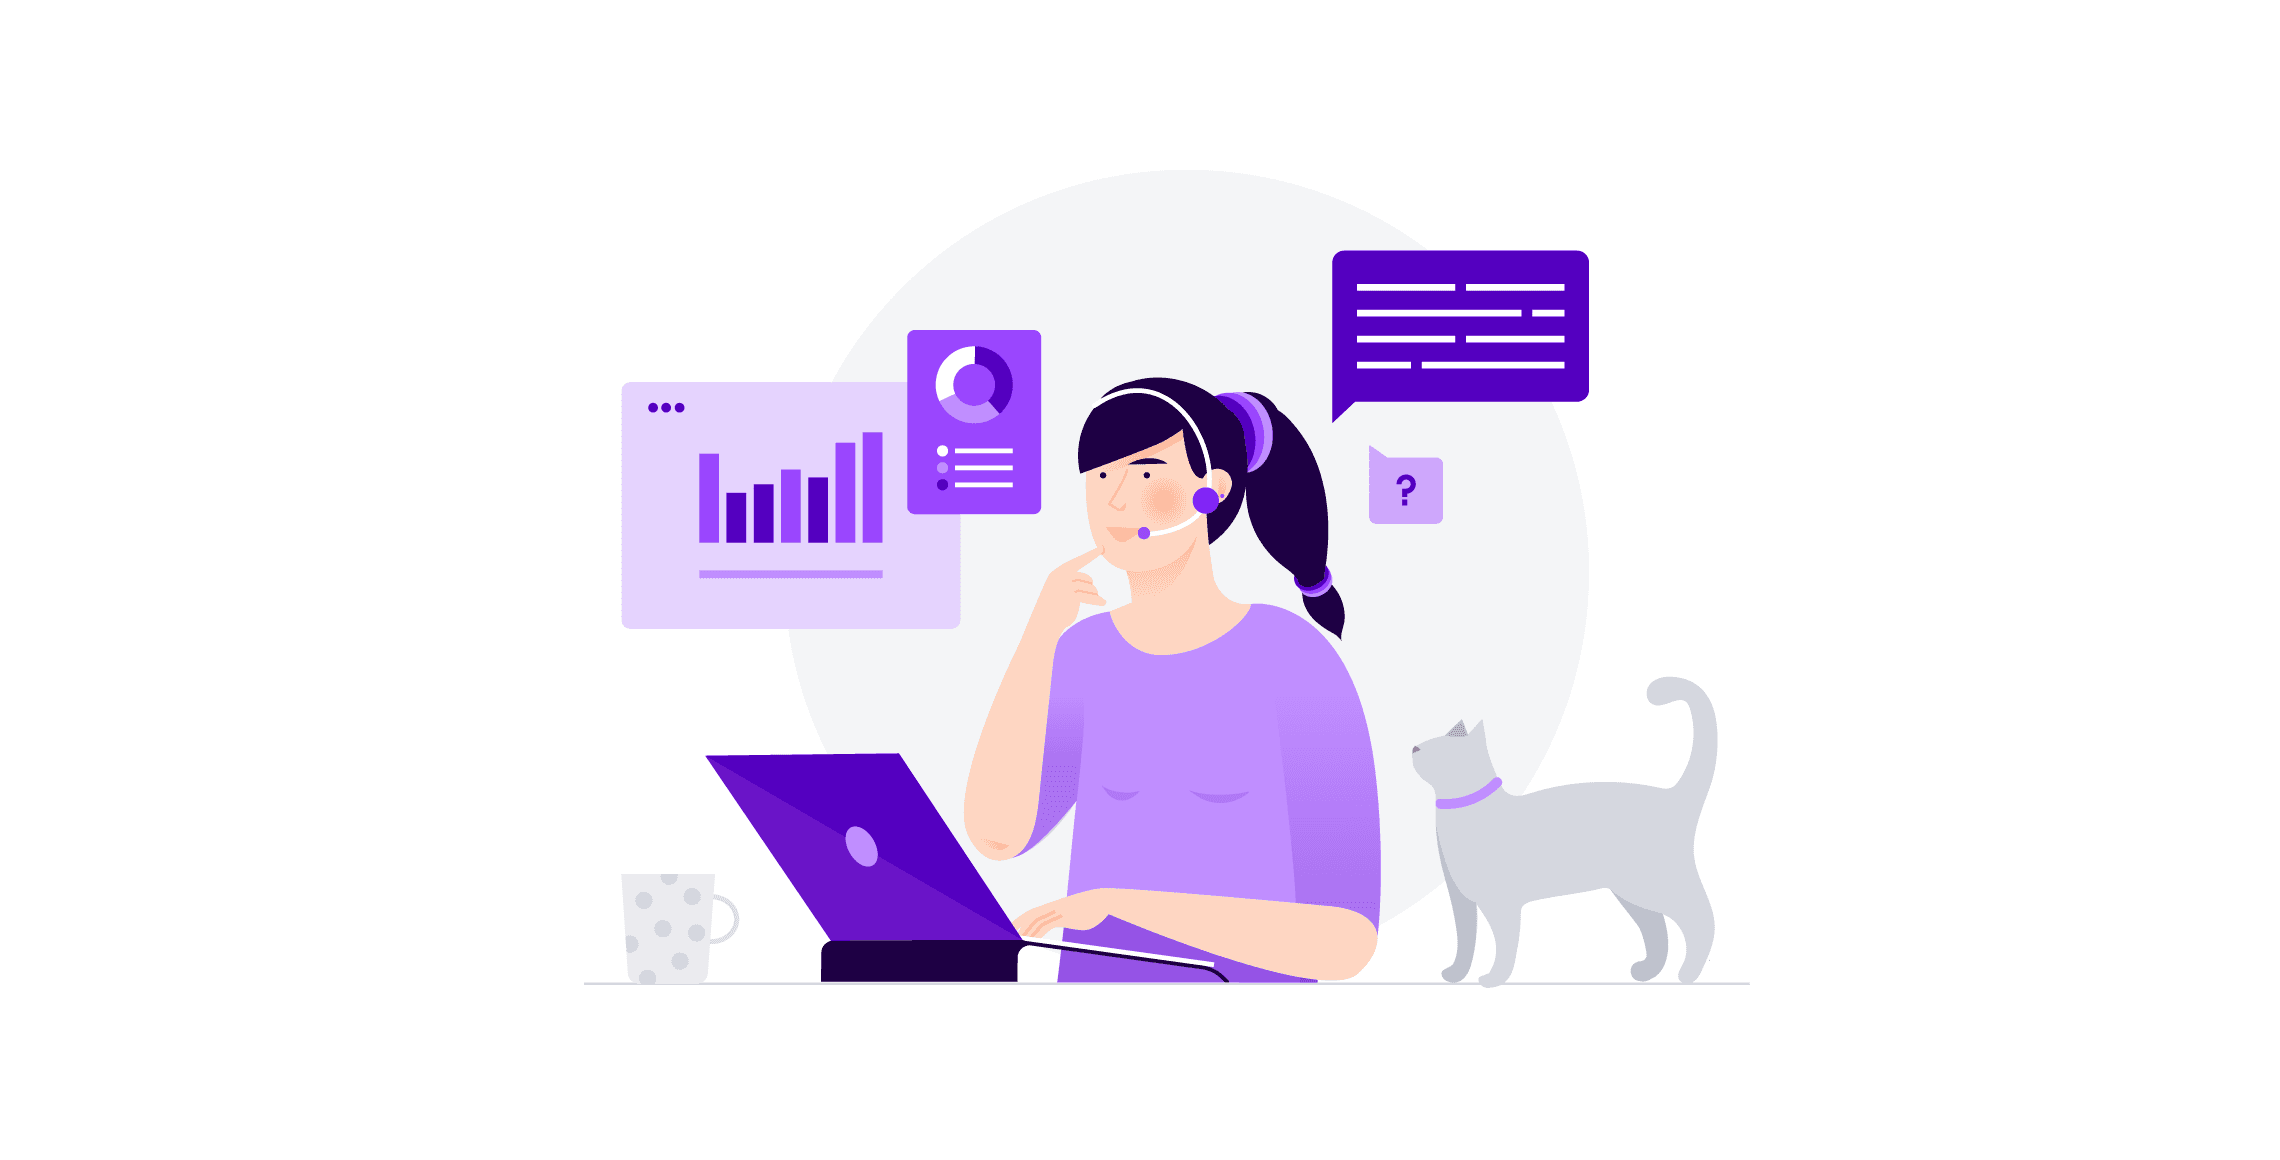 Woman agent using headsets looking at a computer. In the background a cat and several images with graphs and information help to reduce agent attrition